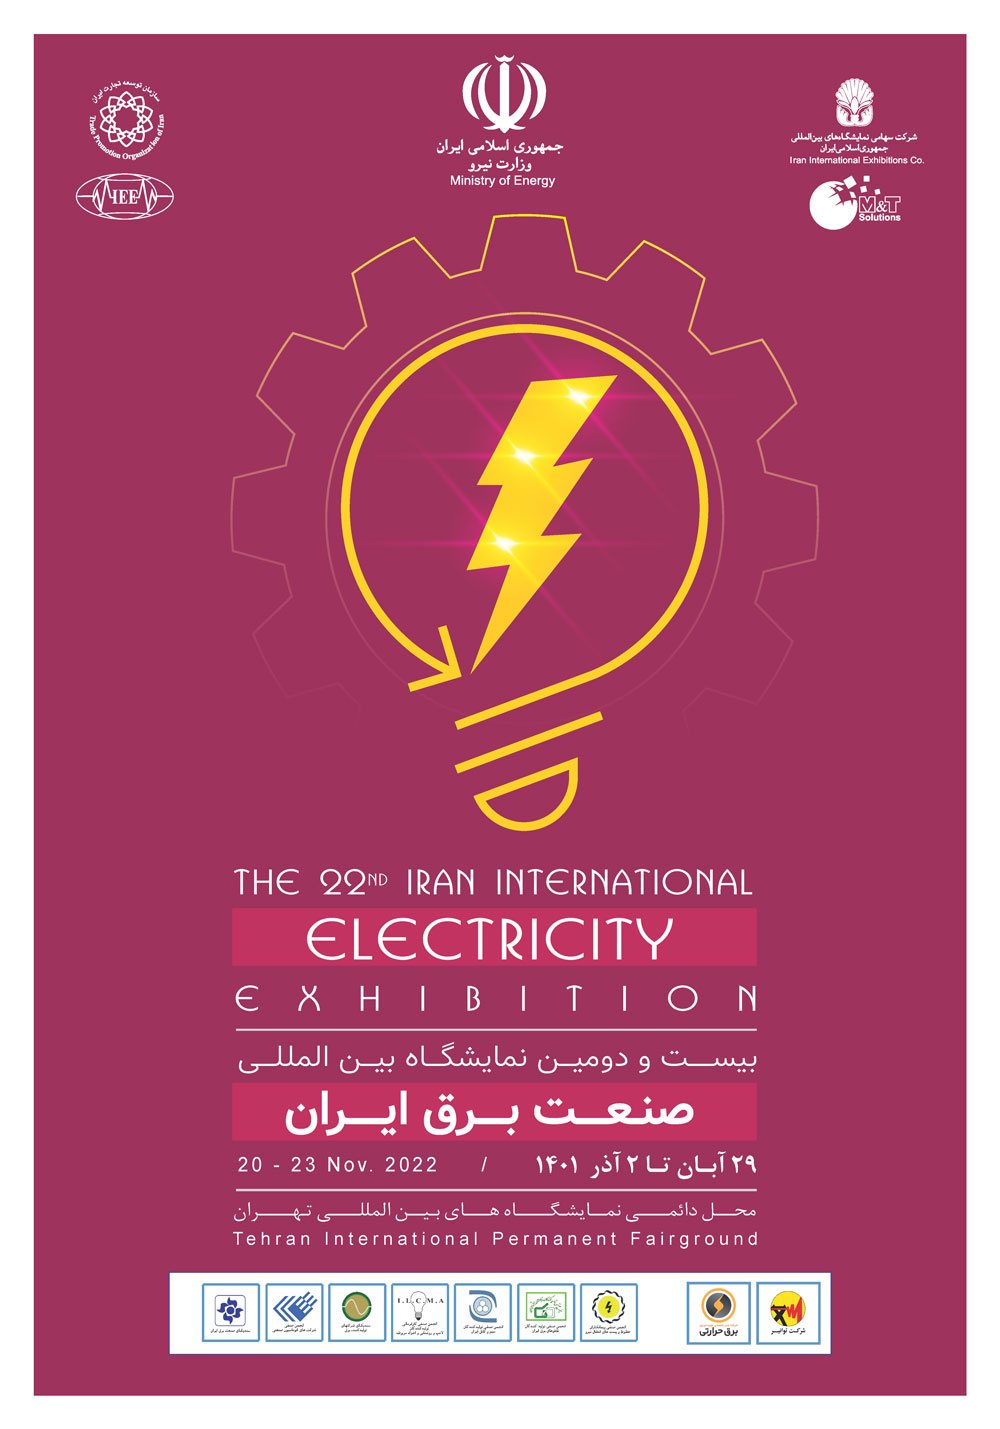 poster Iee 2023 - The 23rd International Electricity Exhibition 2023 in Iran/Tehran